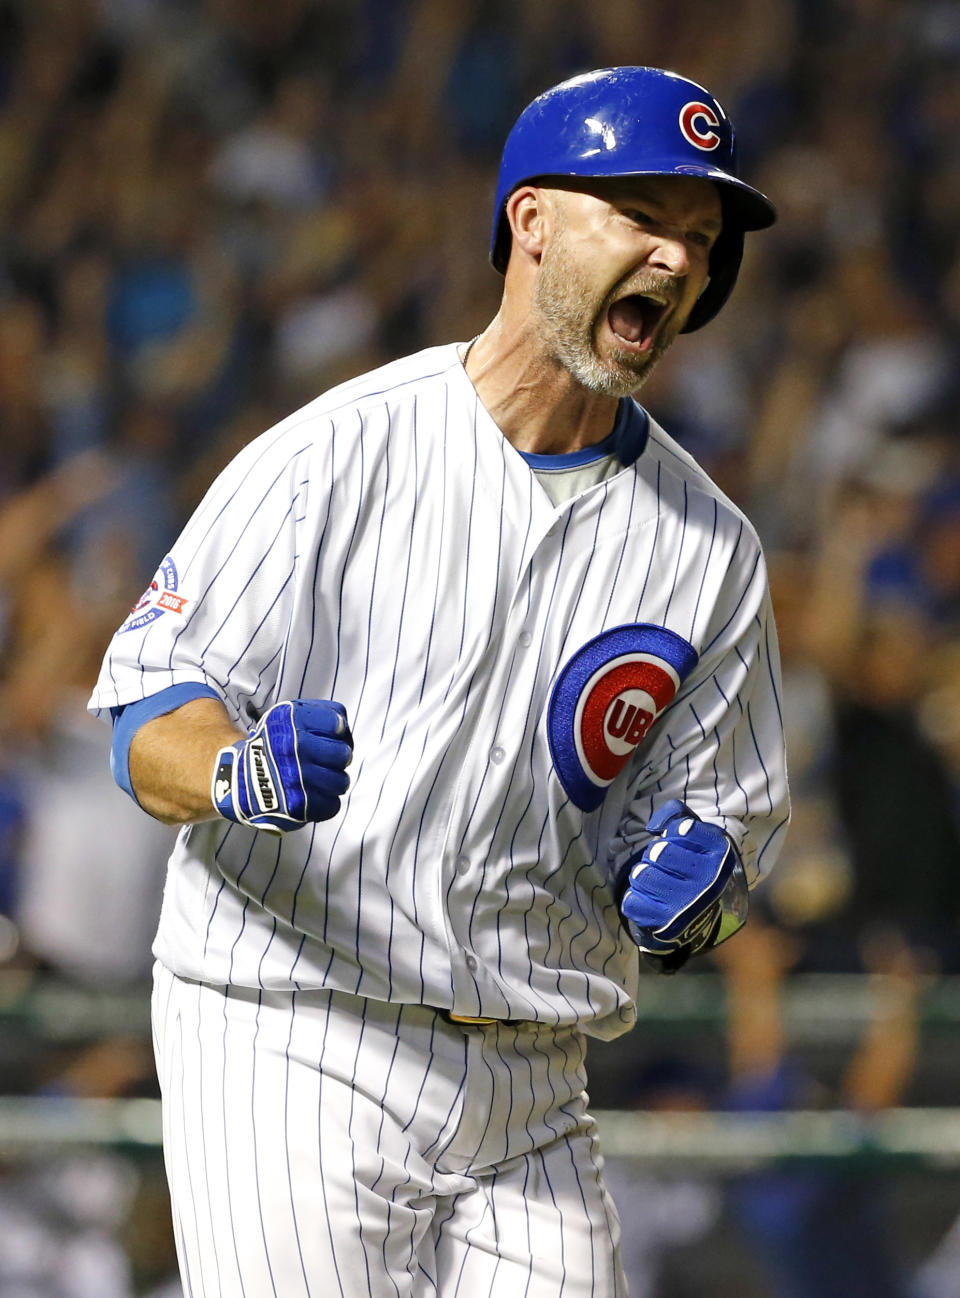 FILE- In this Sept. 25, 2016, file photo, Chicago Cubs' David Ross reacts as he rounds the bases after hitting a solo home run during the fifth inning of a baseball game against the St. Louis Cardinals in Chicago. The Cubs have hired former catcher David Ross to replace Joe Maddon as their manager, hoping he can help them get back to the playoffs after missing out for the first since 2014. (AP Photo/Nam Y. Huh, File)